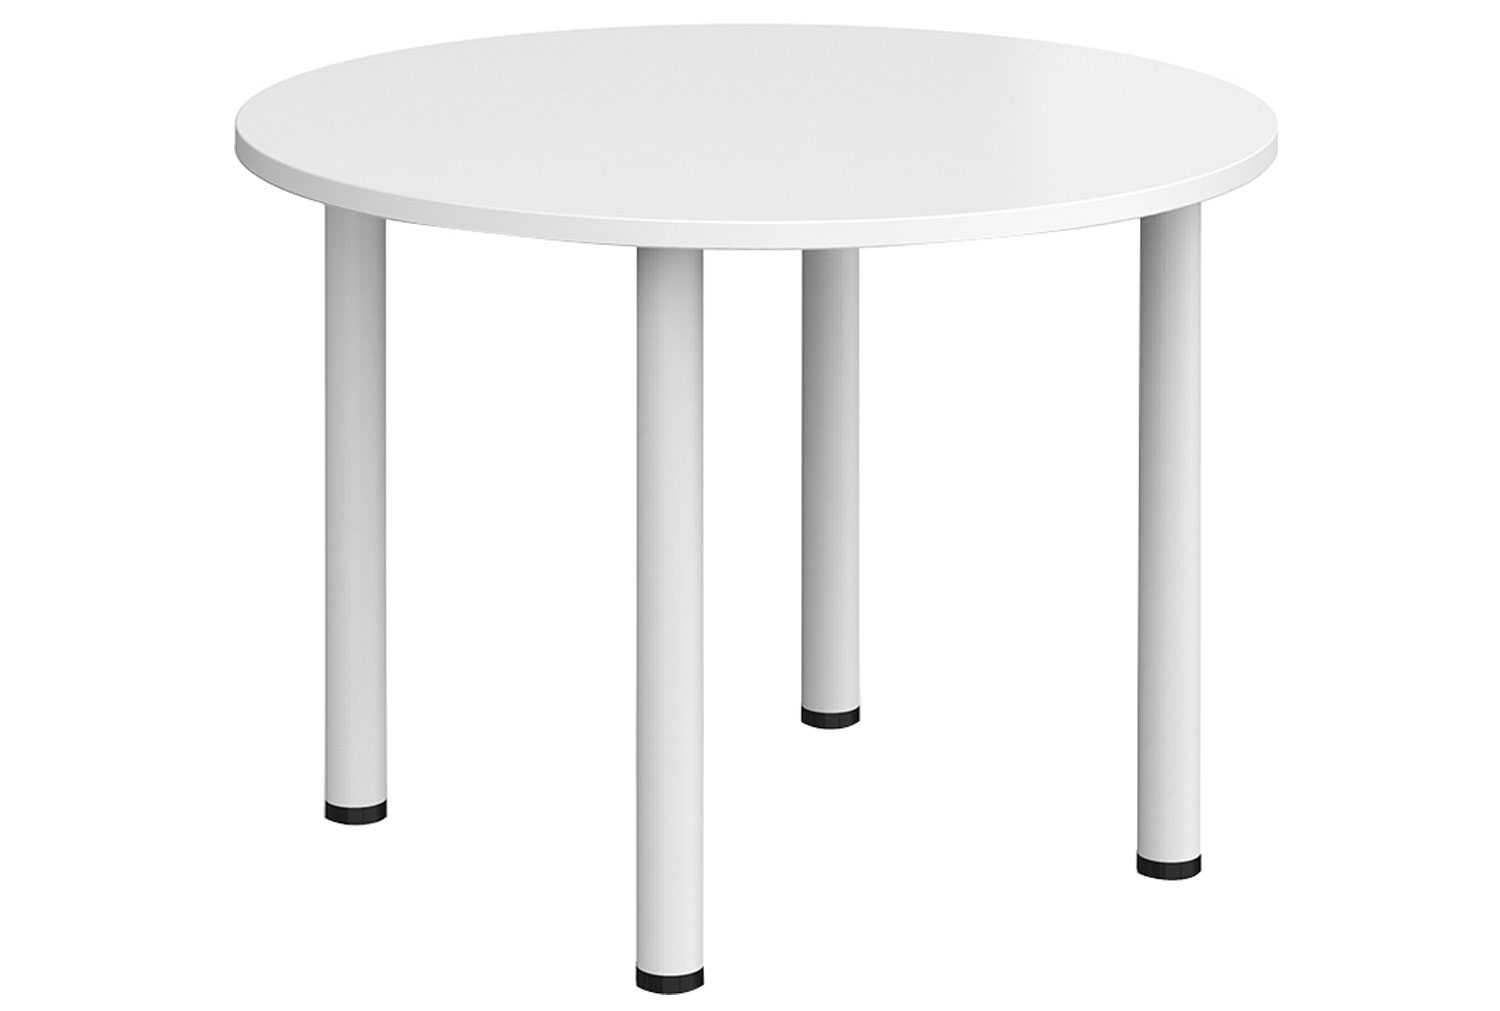 All White Premium Circular Meeting Table (Tubular Legs), 100diax73h (cm), Express Delivery